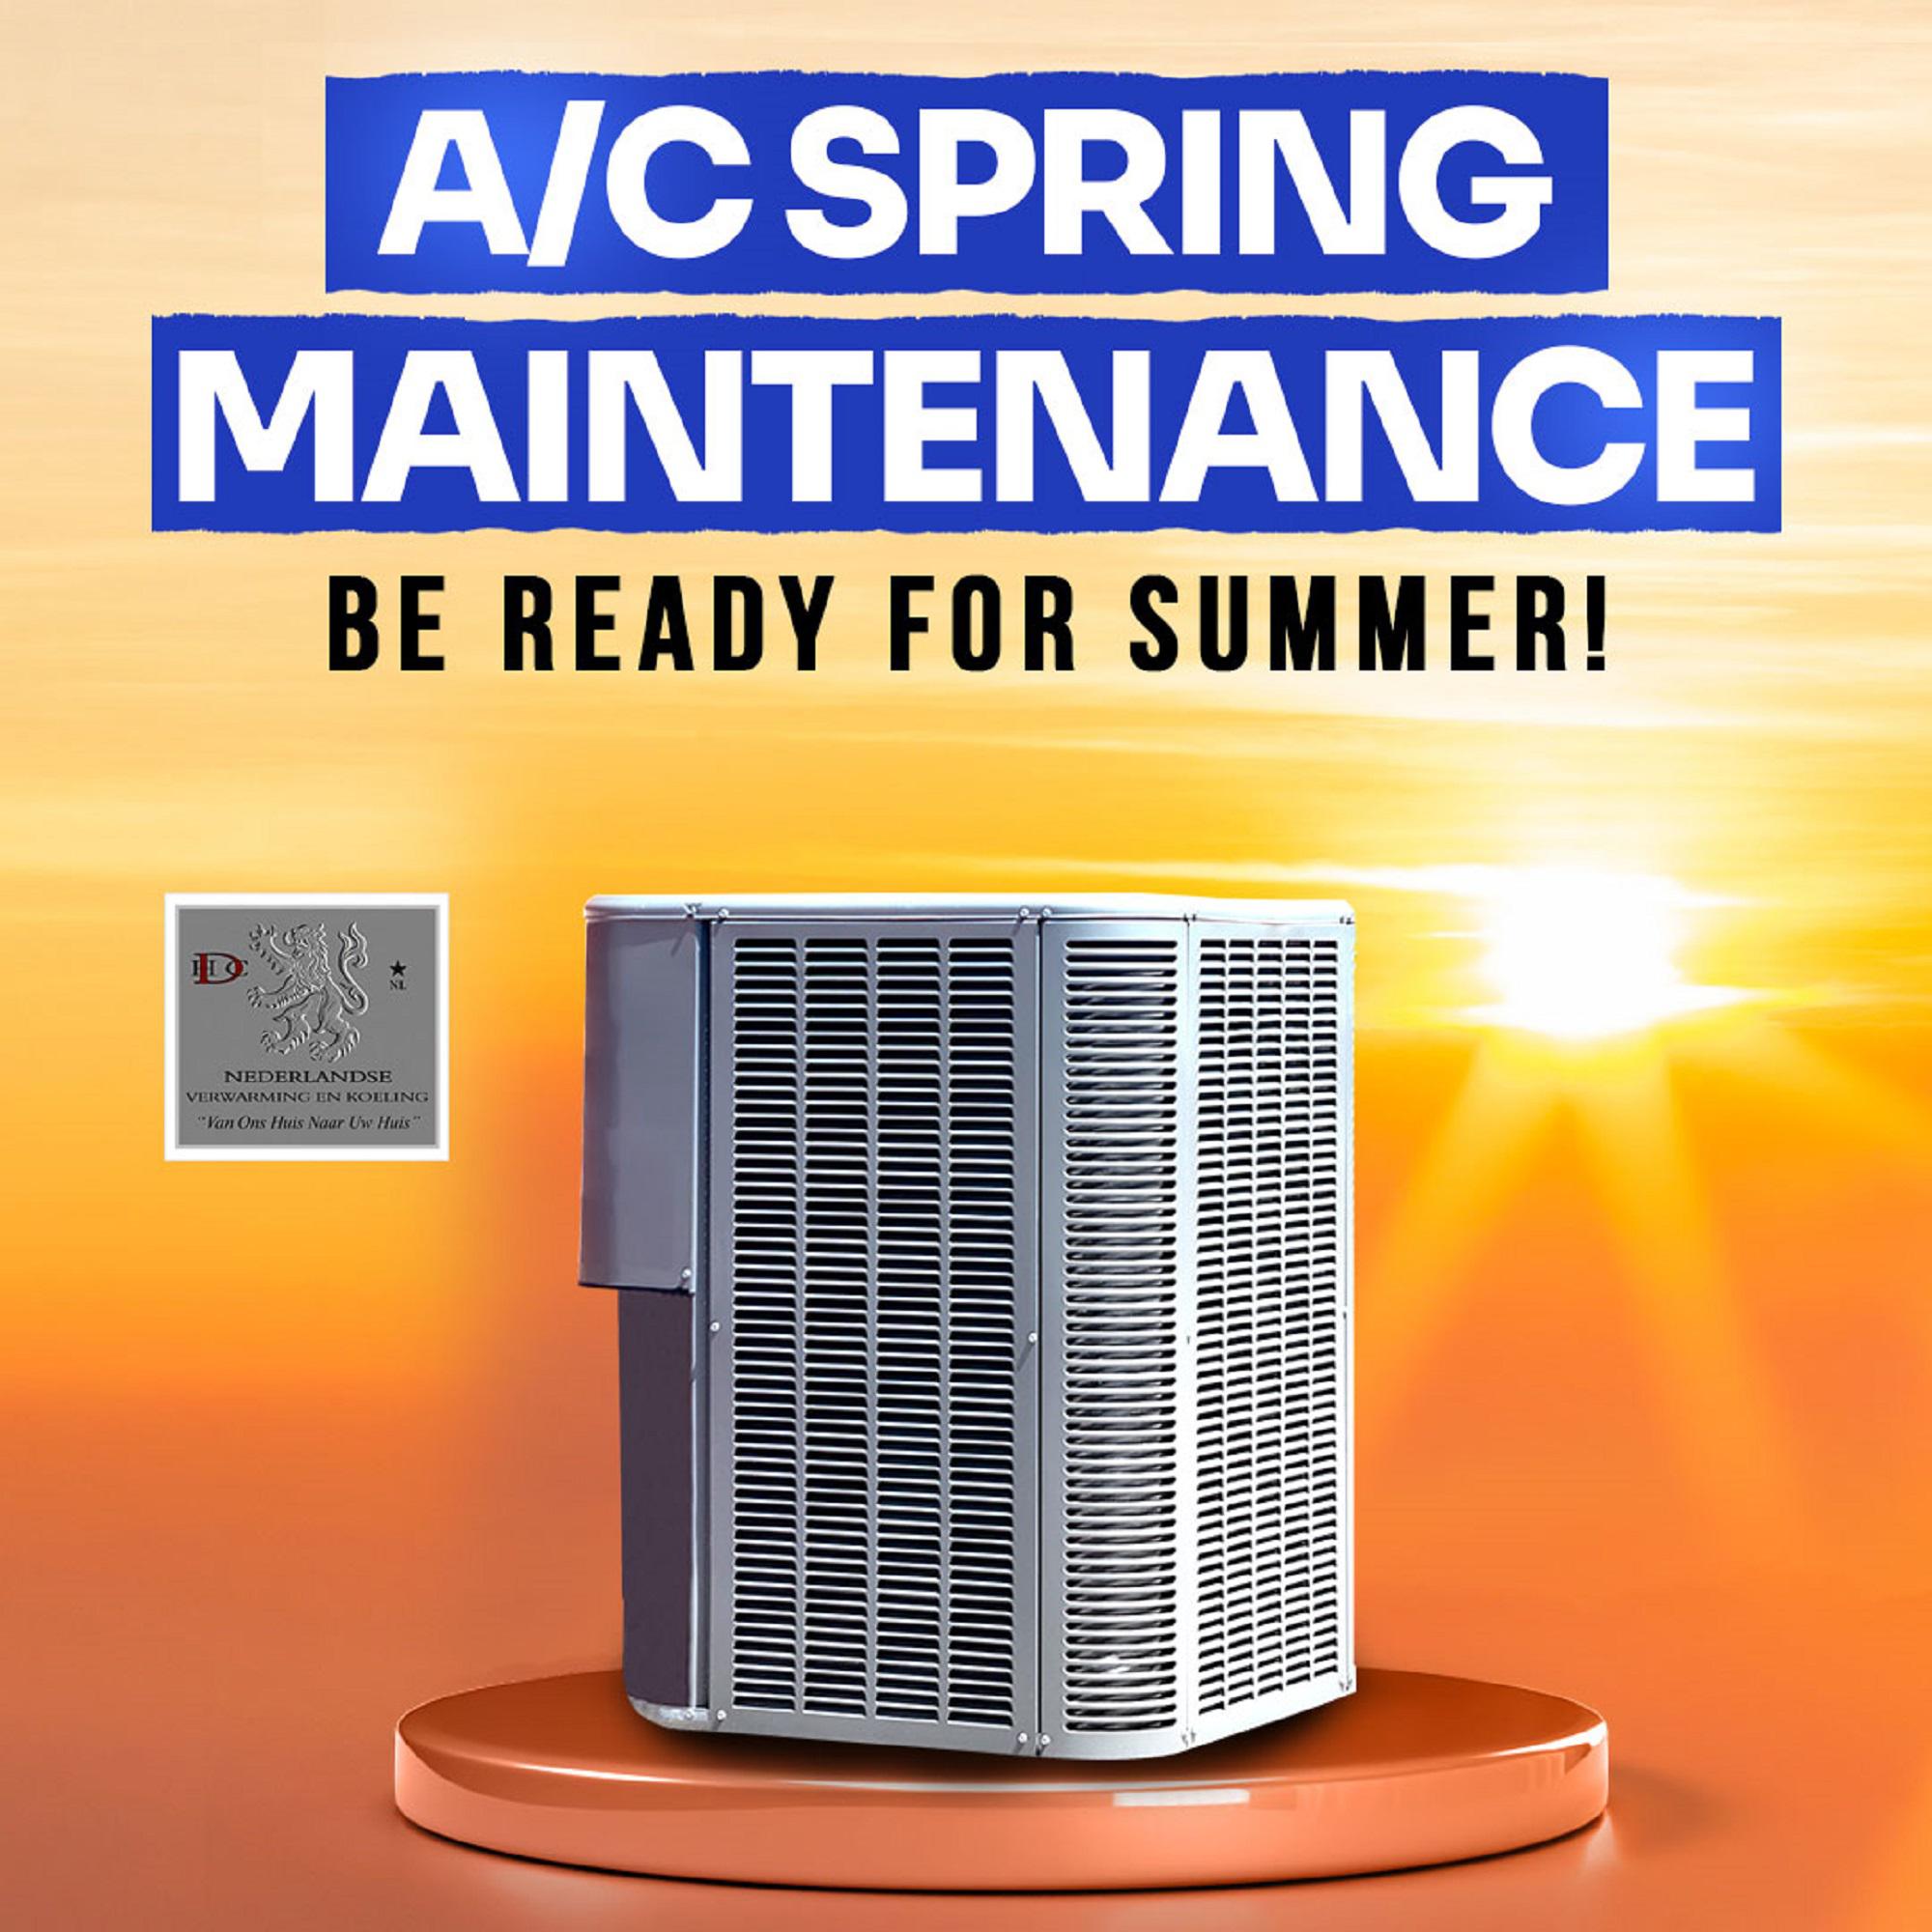 Stay cool and save money with a spring A/C tune-up. Not only will it catch potential problems and lower the risk of repairs, it will also boost your unit's efficiency and lower your energy bills. And who doesn’t want to pay less to stay cool? Don't wait, schedule your tune-up today and enjoy the benefits of a well-maintained A/C unit all summer long.